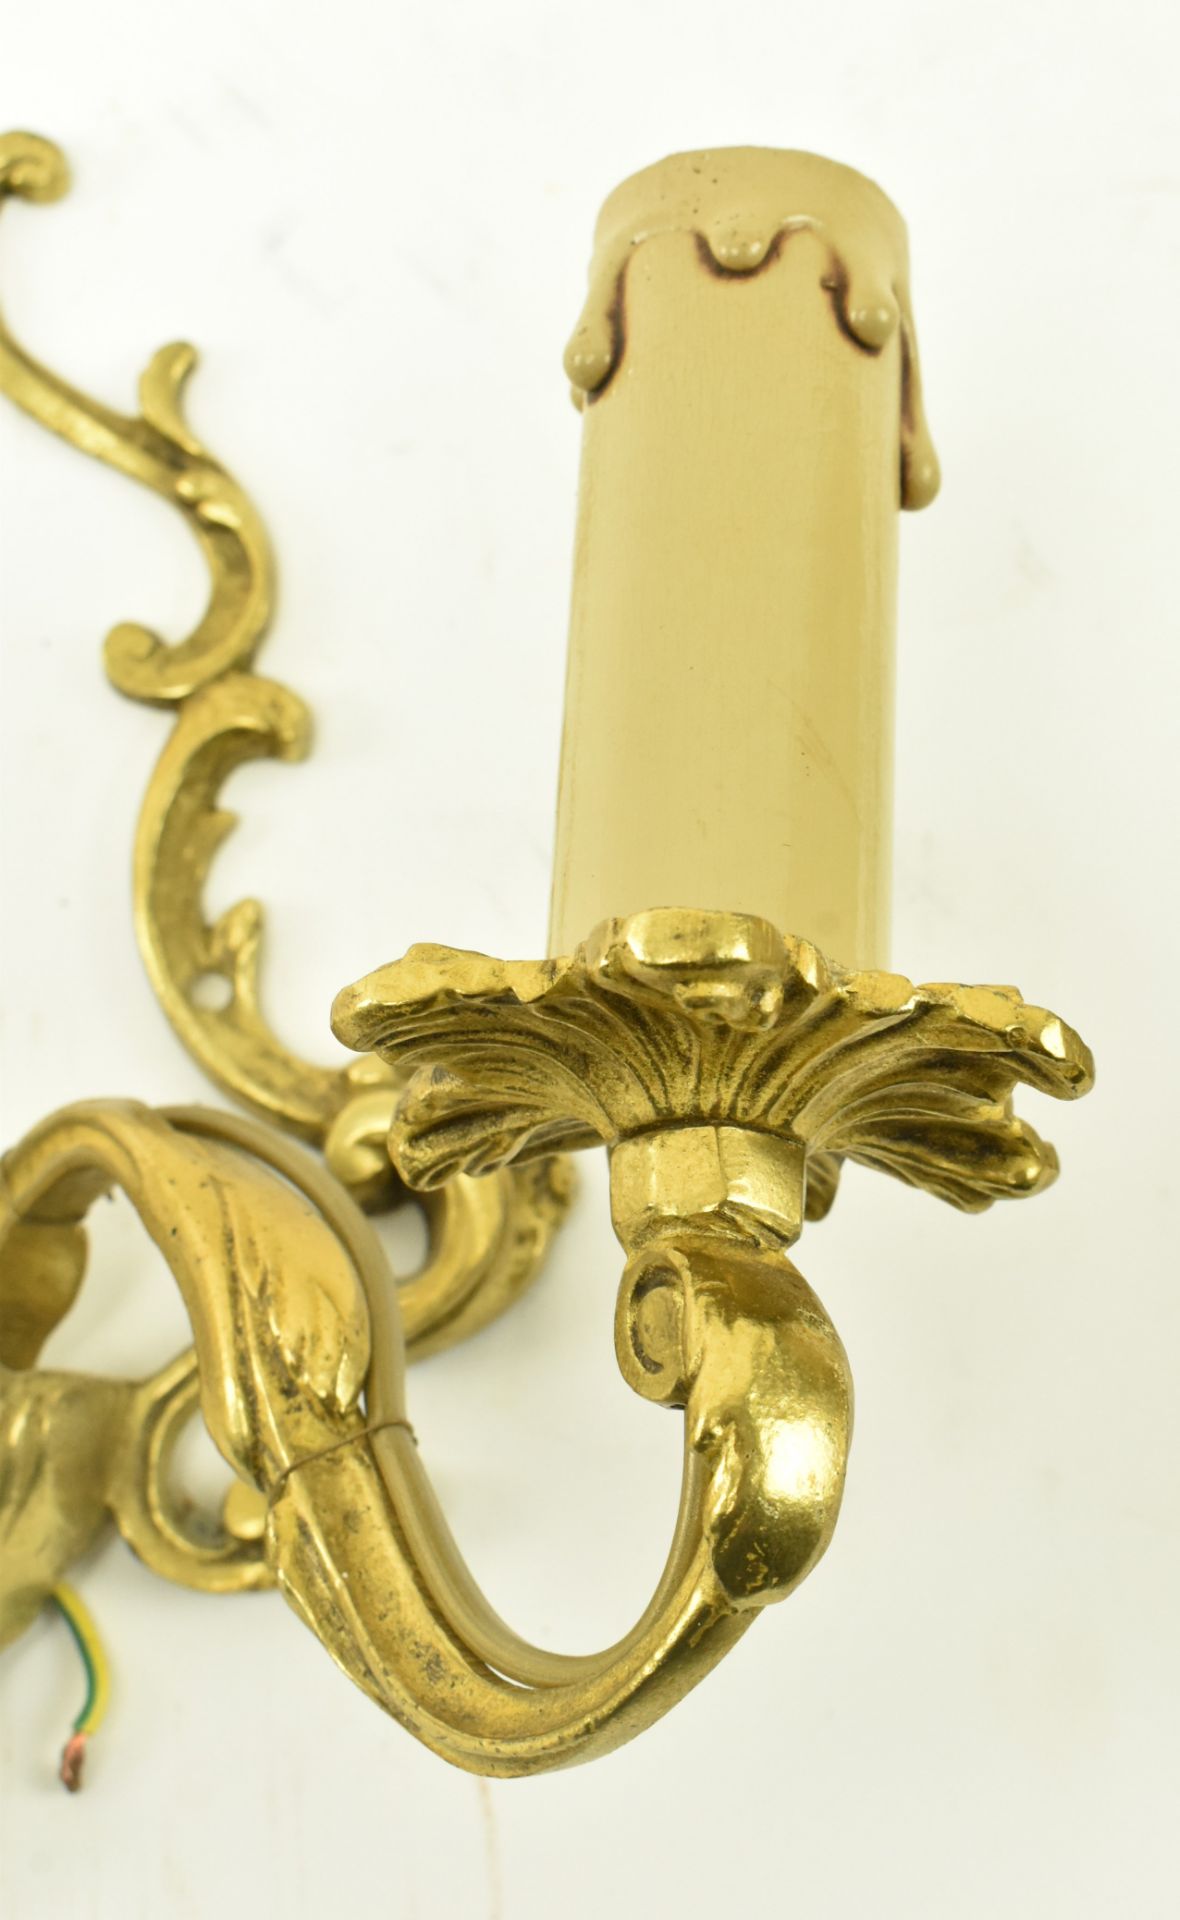 THREE FRENCH STYLE ROCOCO INSPIRED GILDED METAL WALL SCONCES - Image 3 of 5